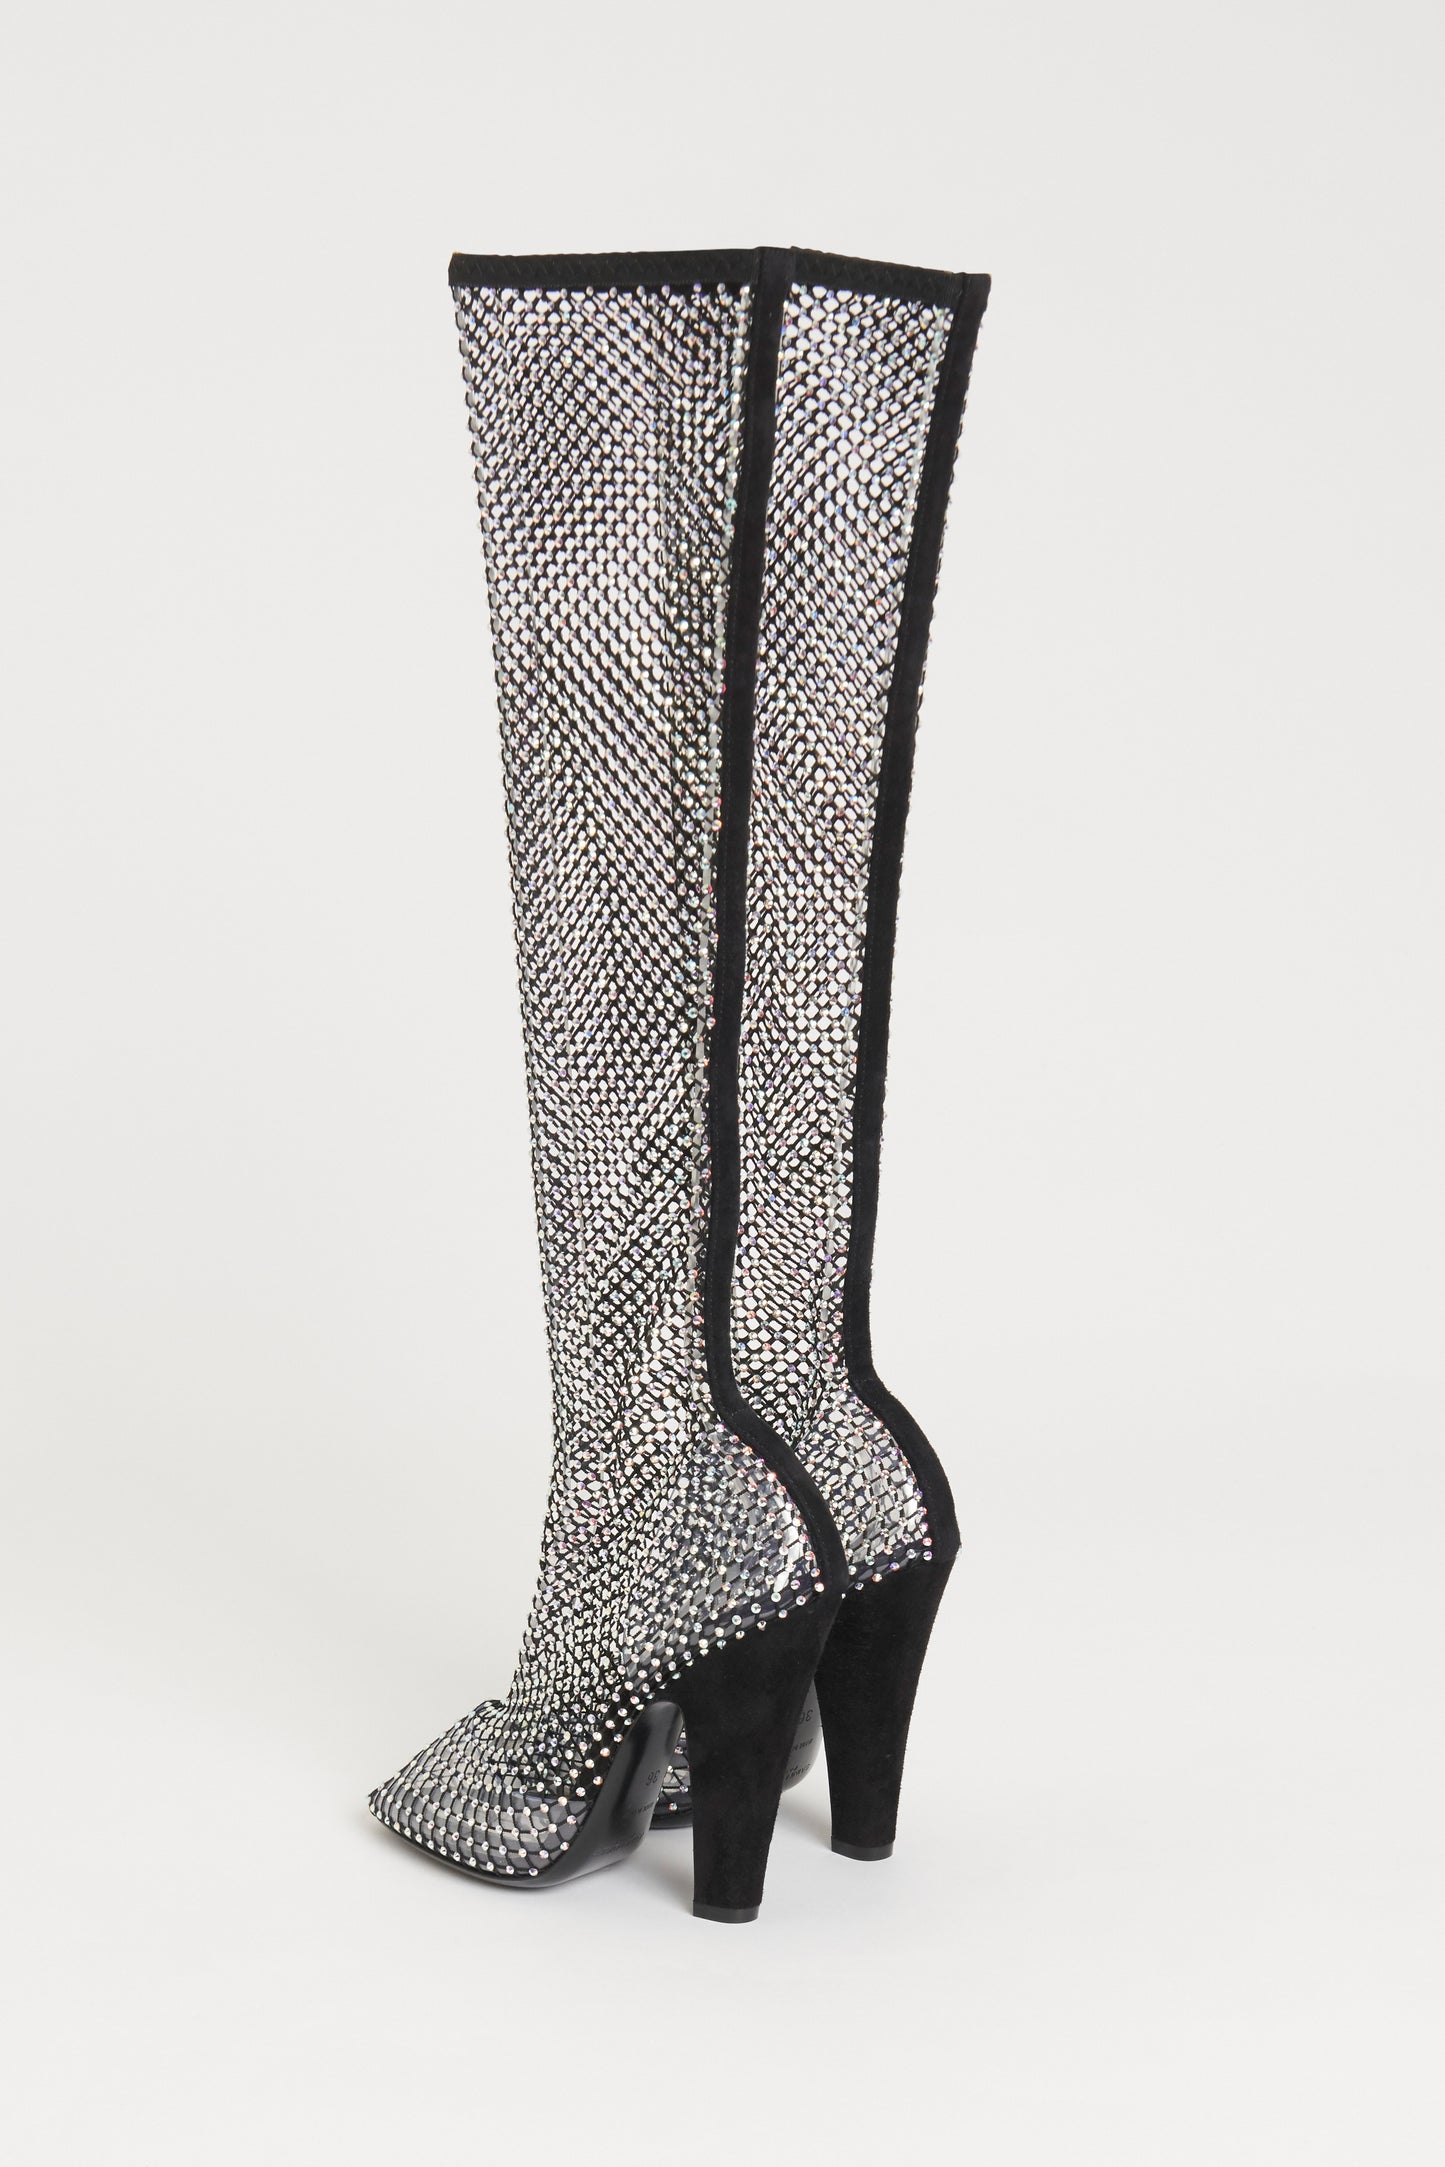 2022 Black Mesh 68 Preowned Diamante Over the Knee Boots